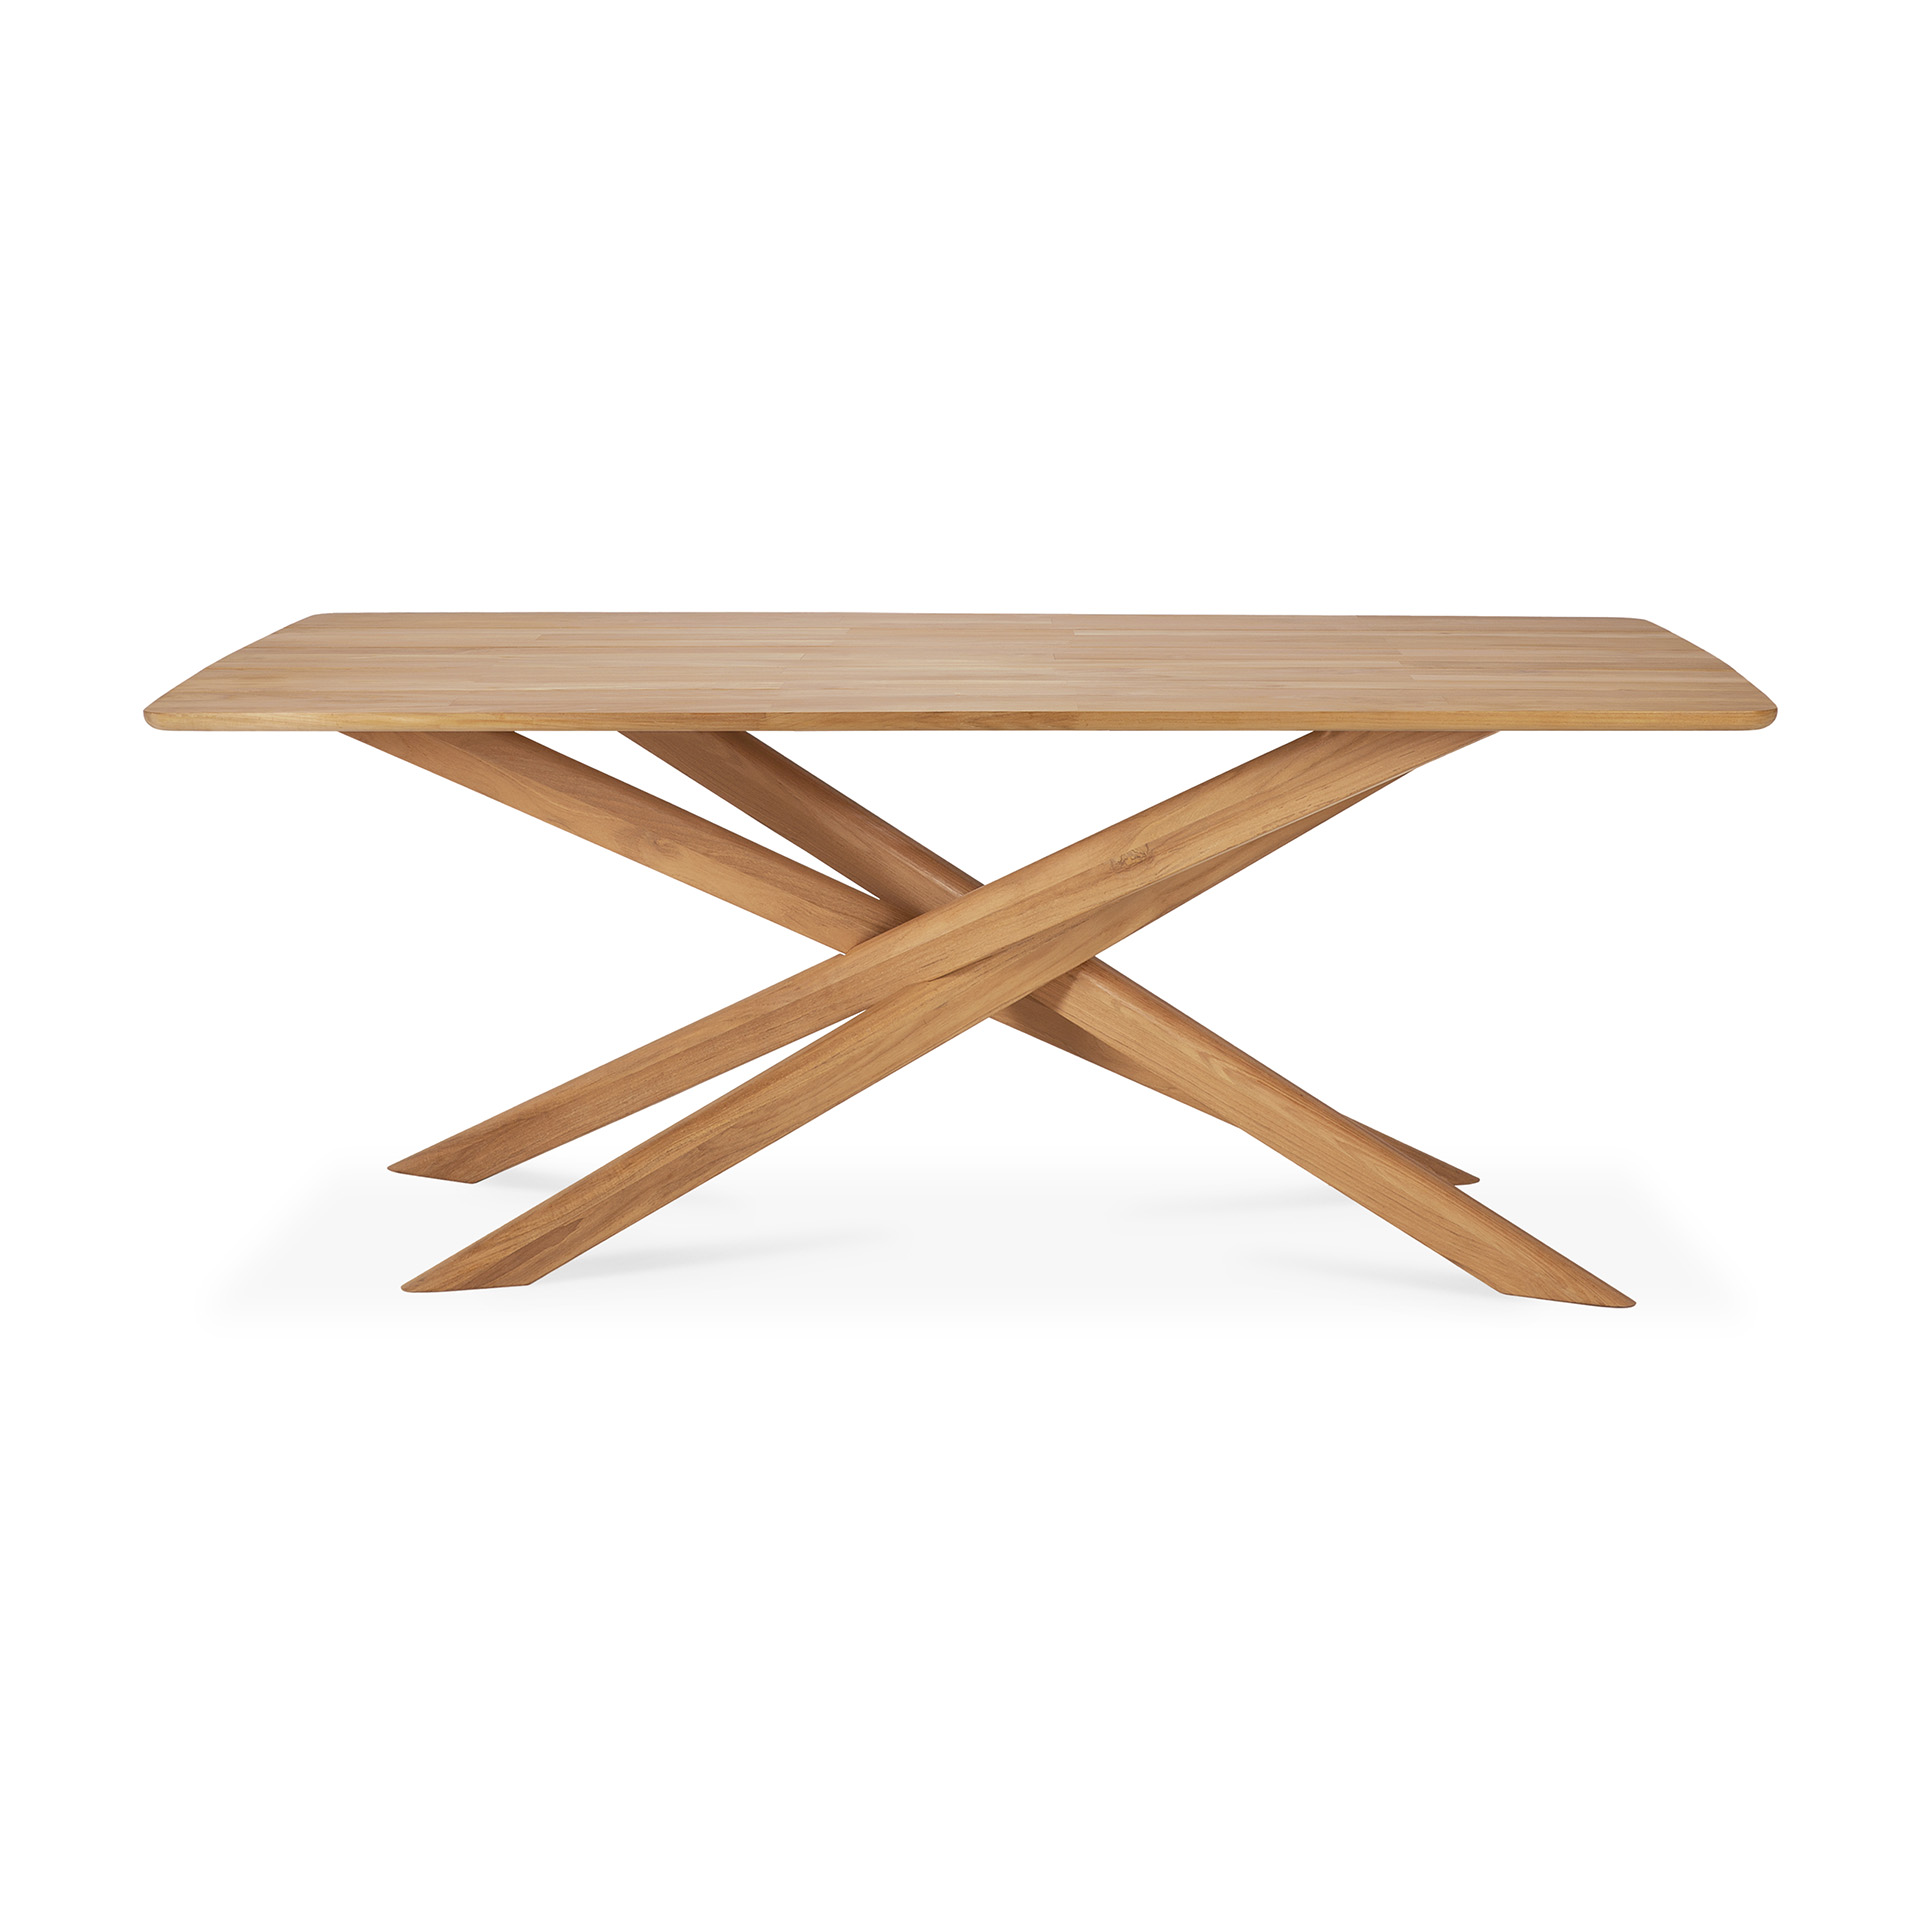 10273_Teak_Mikado_outdoor_dining_table_front_cut_web